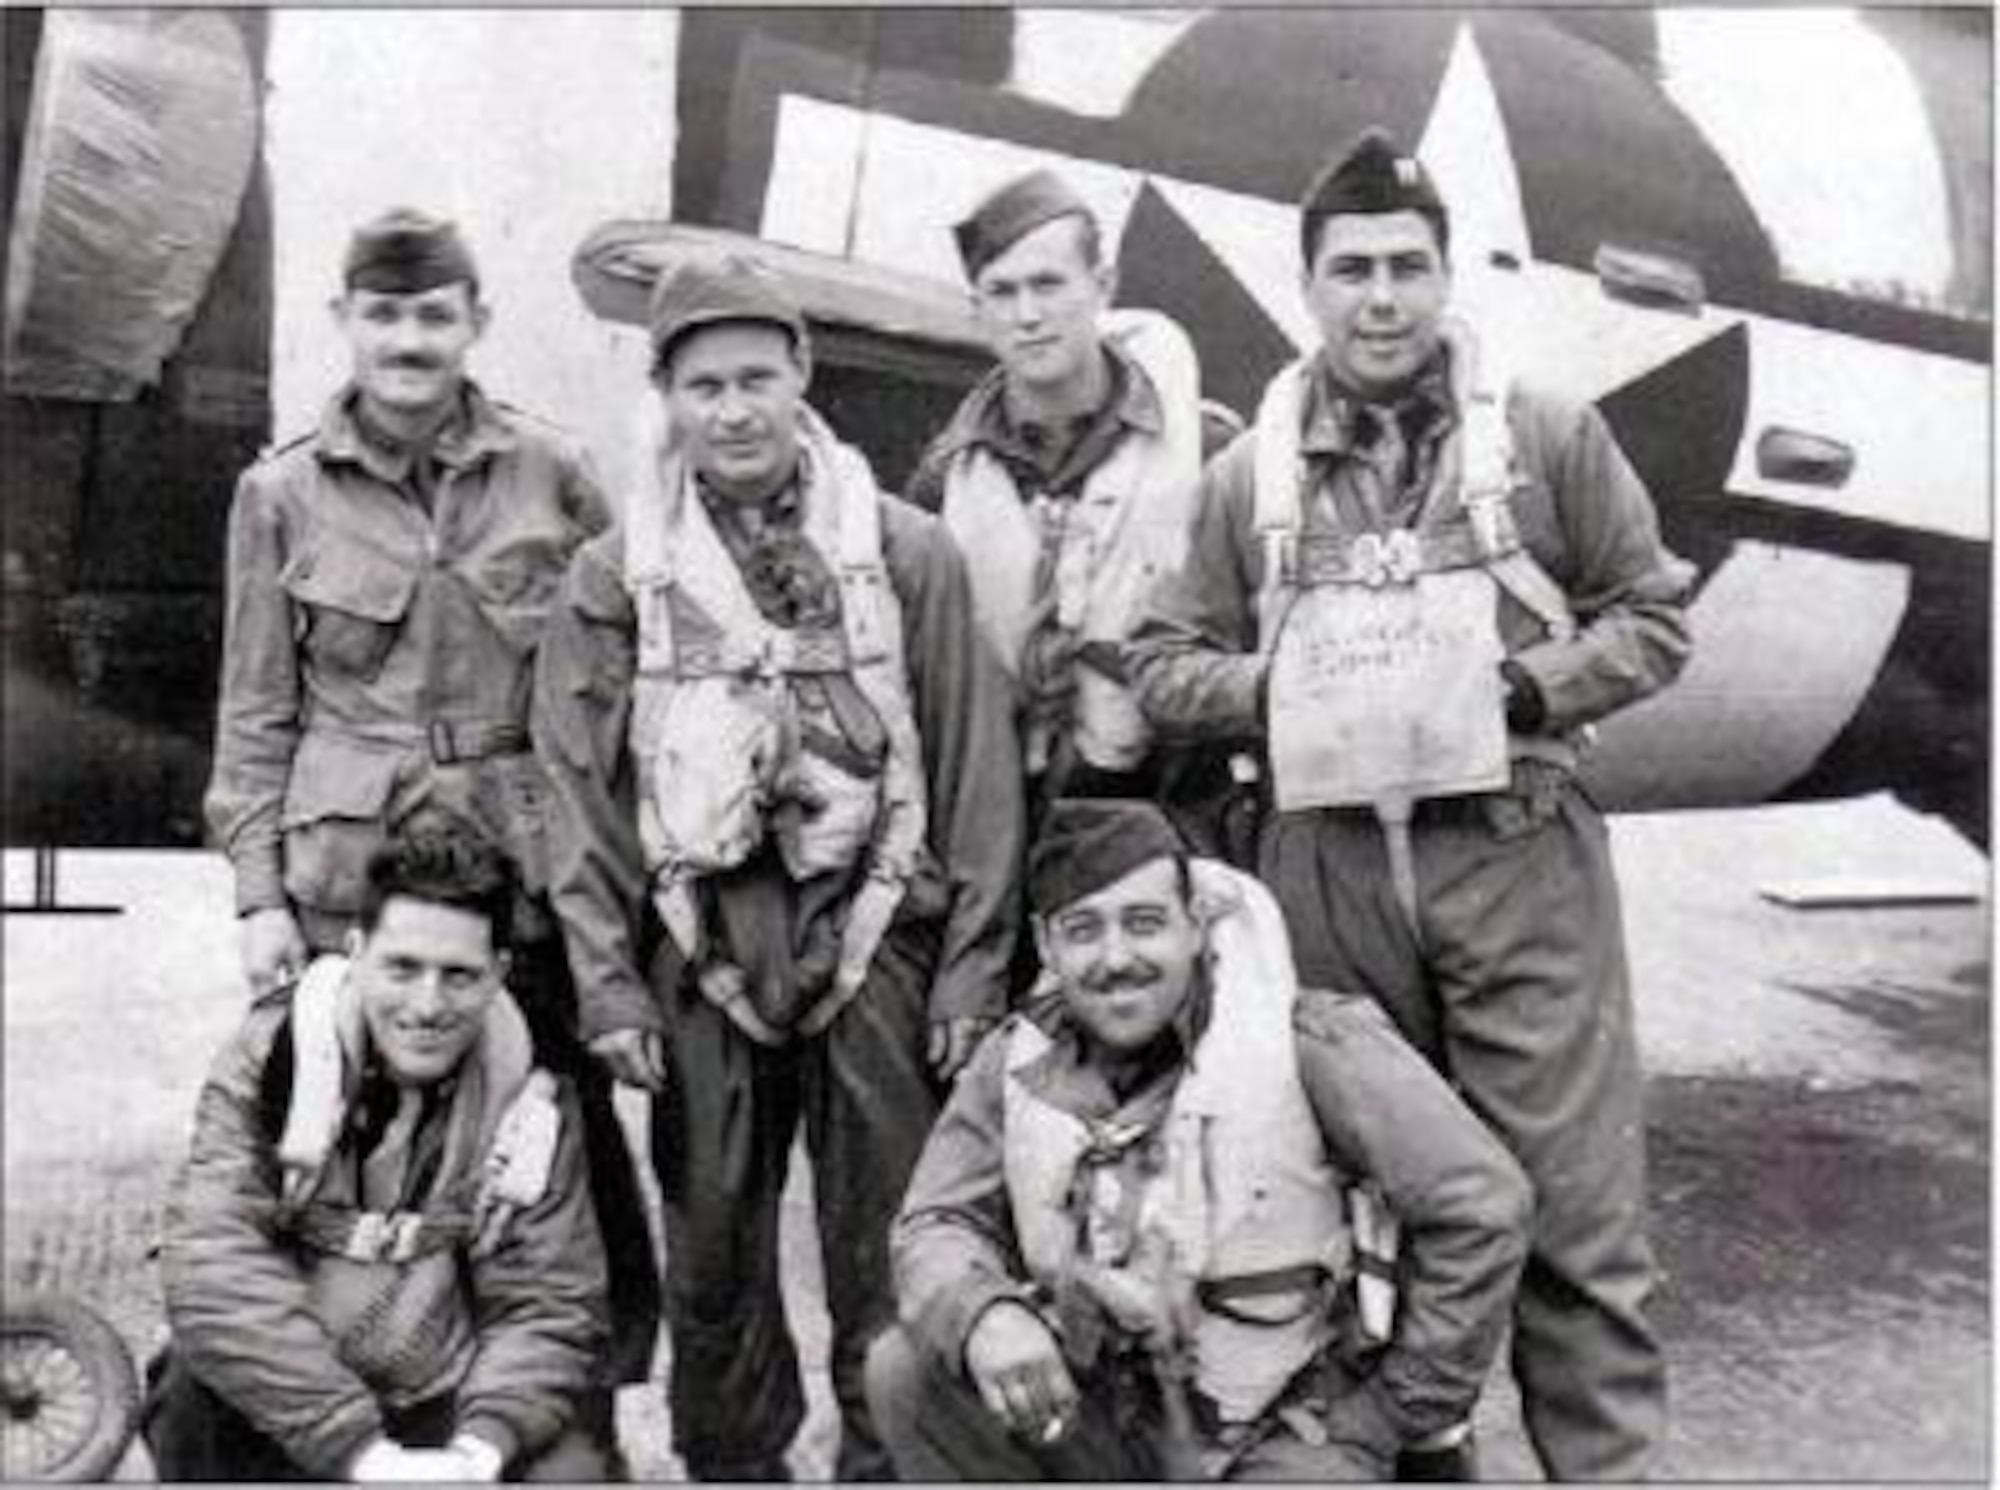 Retired Col. Vito Pedone, at the time Capt. Pedone (top right) stands with his C-47 Skytrain aircrew before their D-Day operation in 1944. (Curtesy photo)